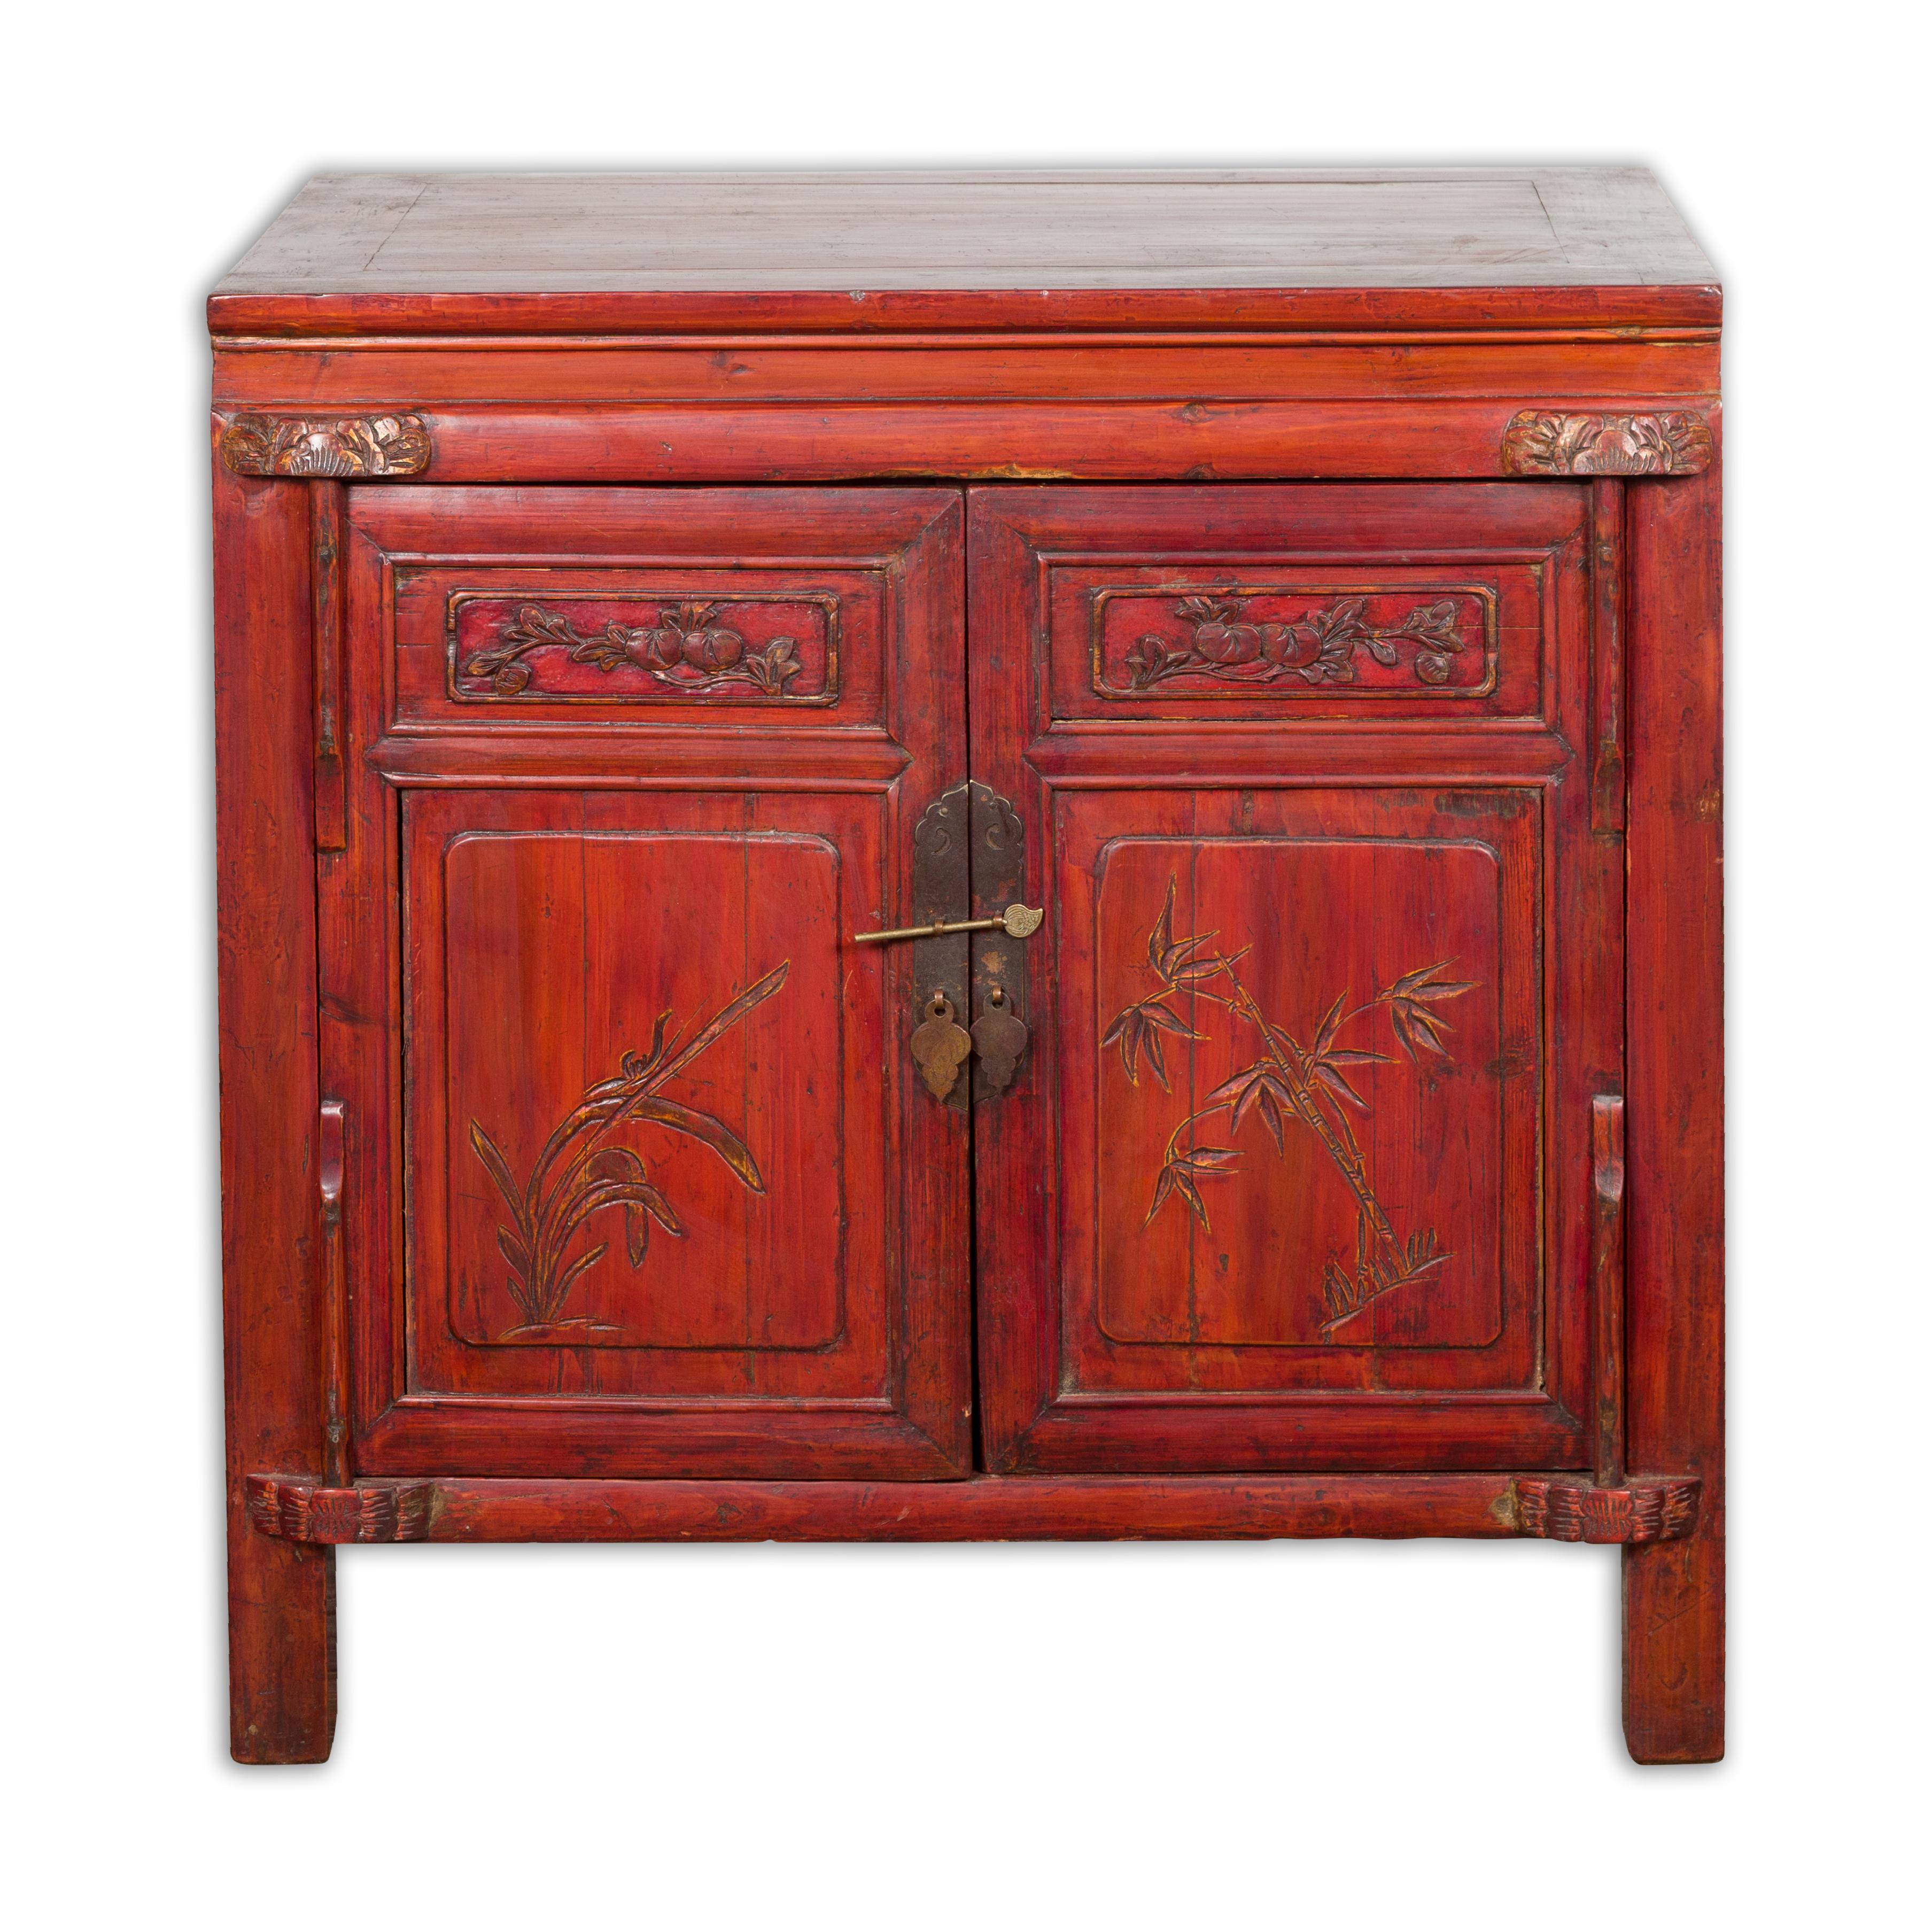 Chinese Red Lacquer Late Qing Dynasty Bedside Cabinet with Carved Décor For Sale 15